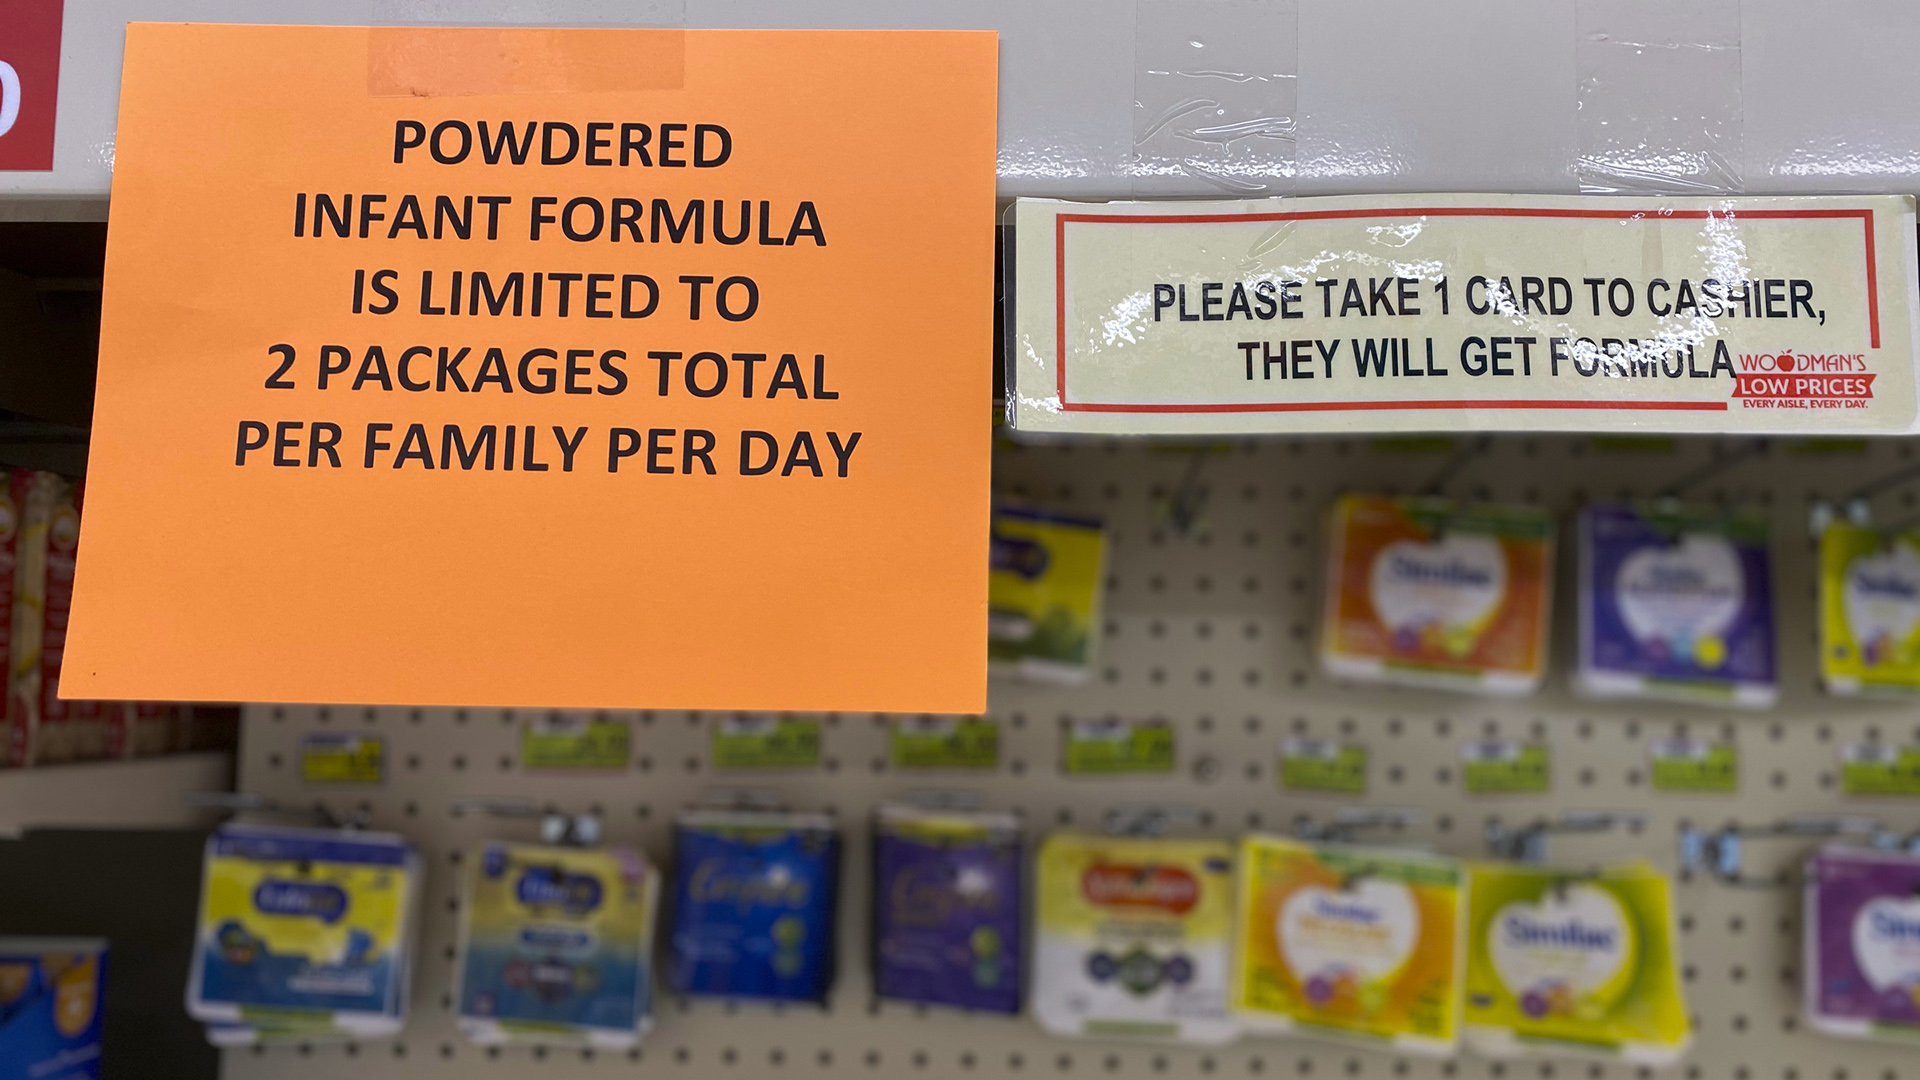 Printed signs on a grocery store shelf read "Powdered infant formula is limited to 2 packages total per family per day" and "Please take 1 card to cashier, they will get forumla."